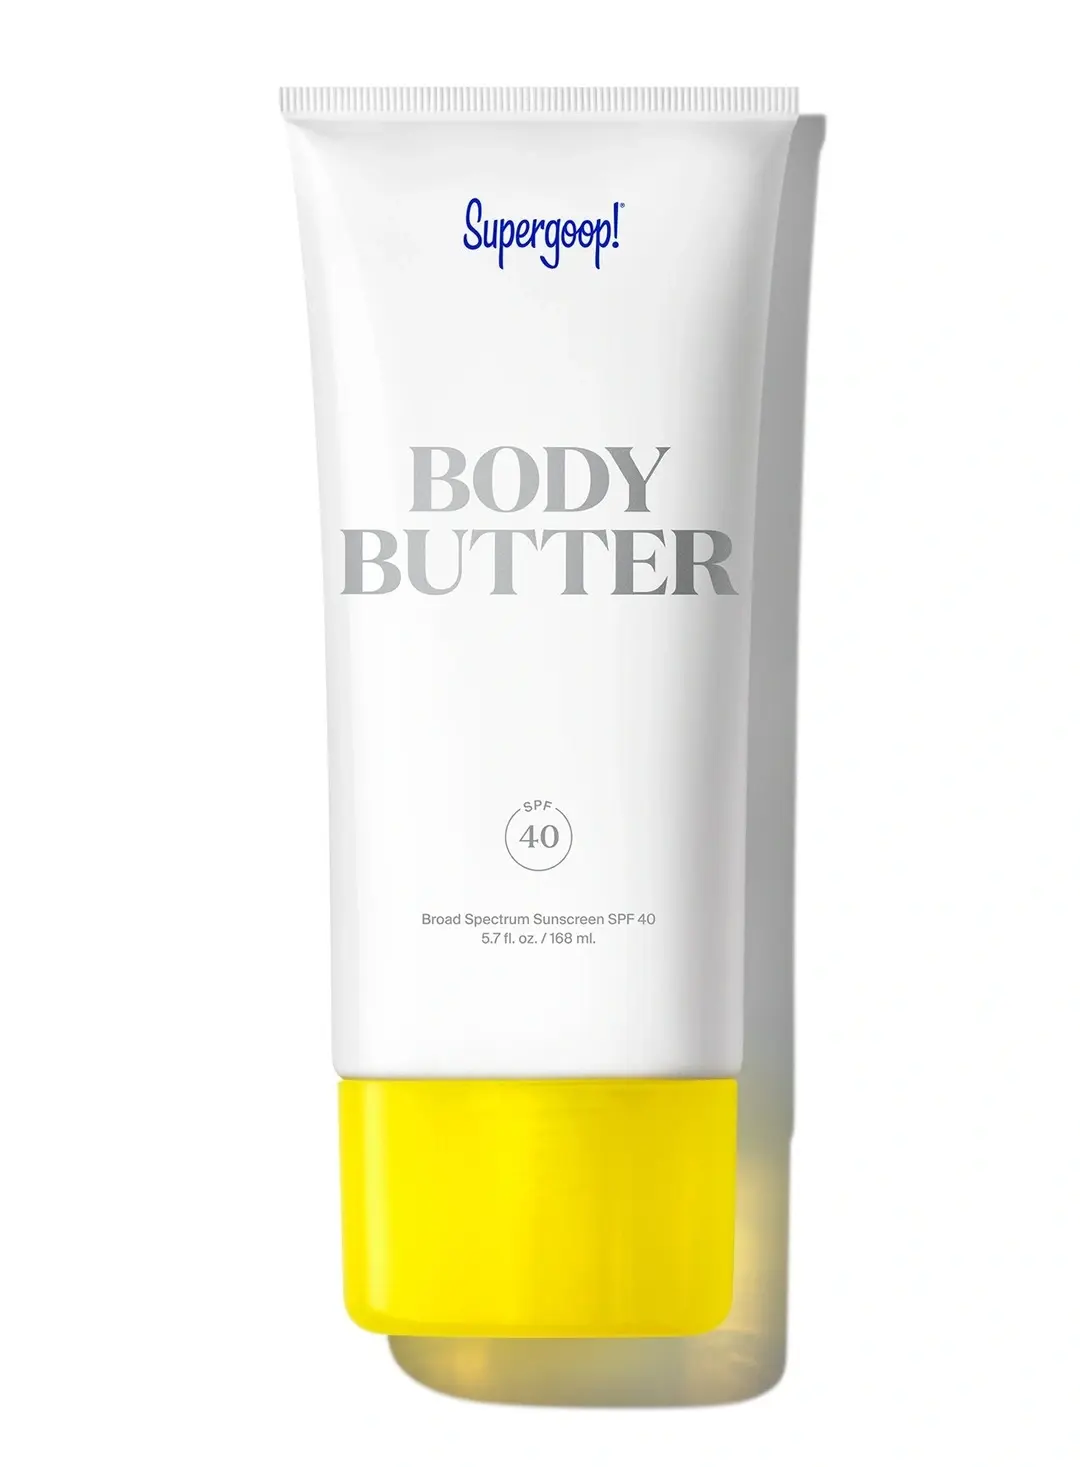 Supergoop! Body Butter with Sea Buckthorn SPF 40, 5.7 fl oz - Reef-Friendly, Hydrating Body Cream For Dry Skin with Broad-Spectrum UV Protection - Hints of Eucalyptus, Clove & Vanilla 1